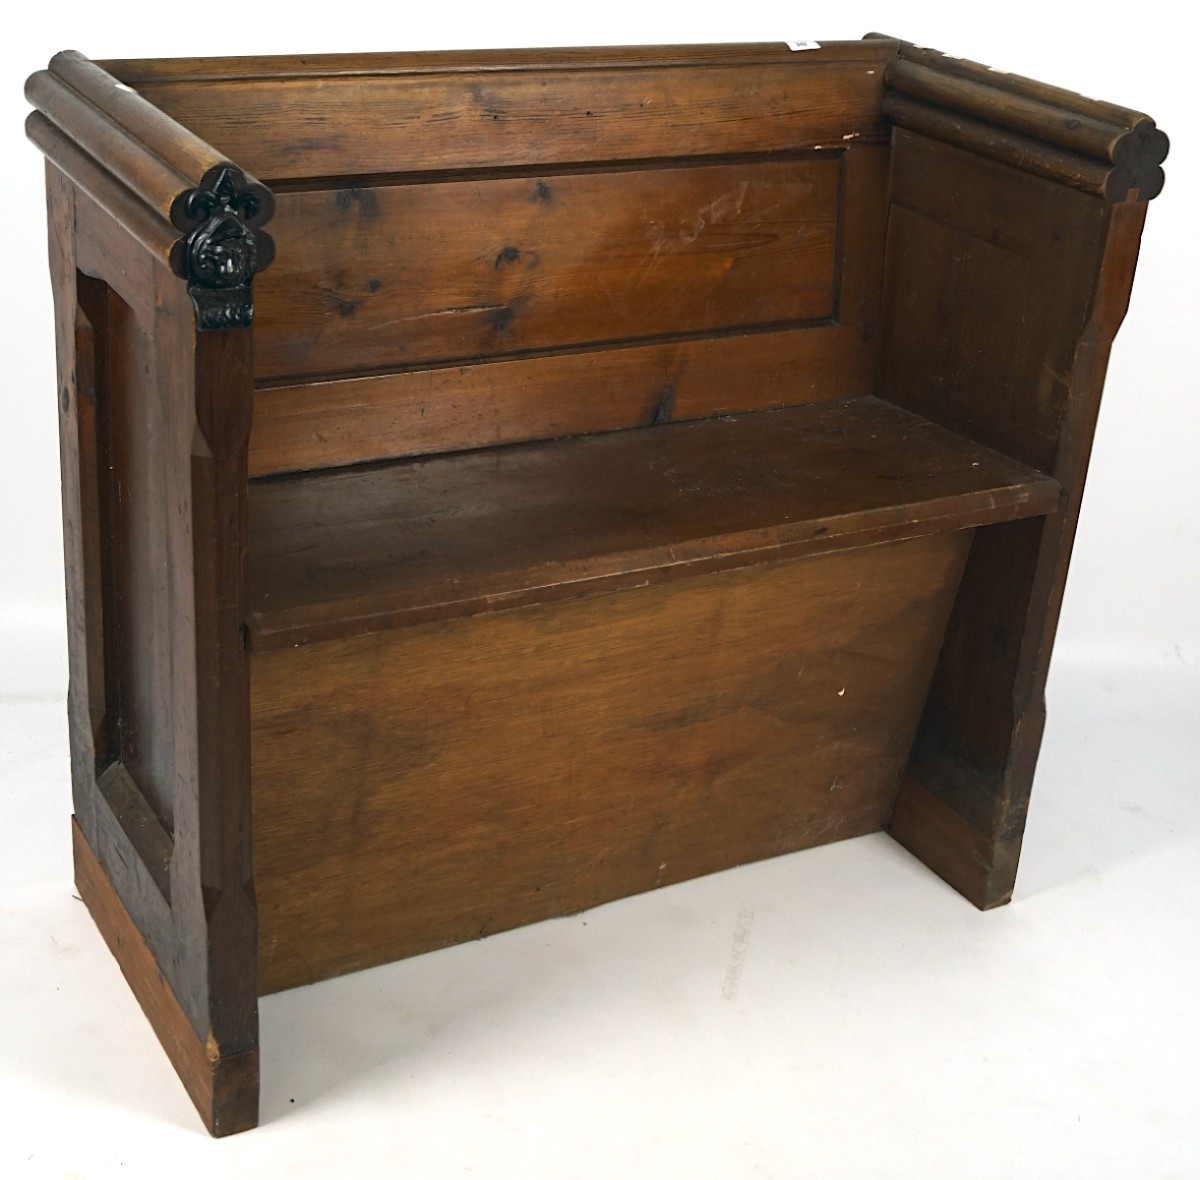 A late 19th/early 20th century stained wooden church pew,